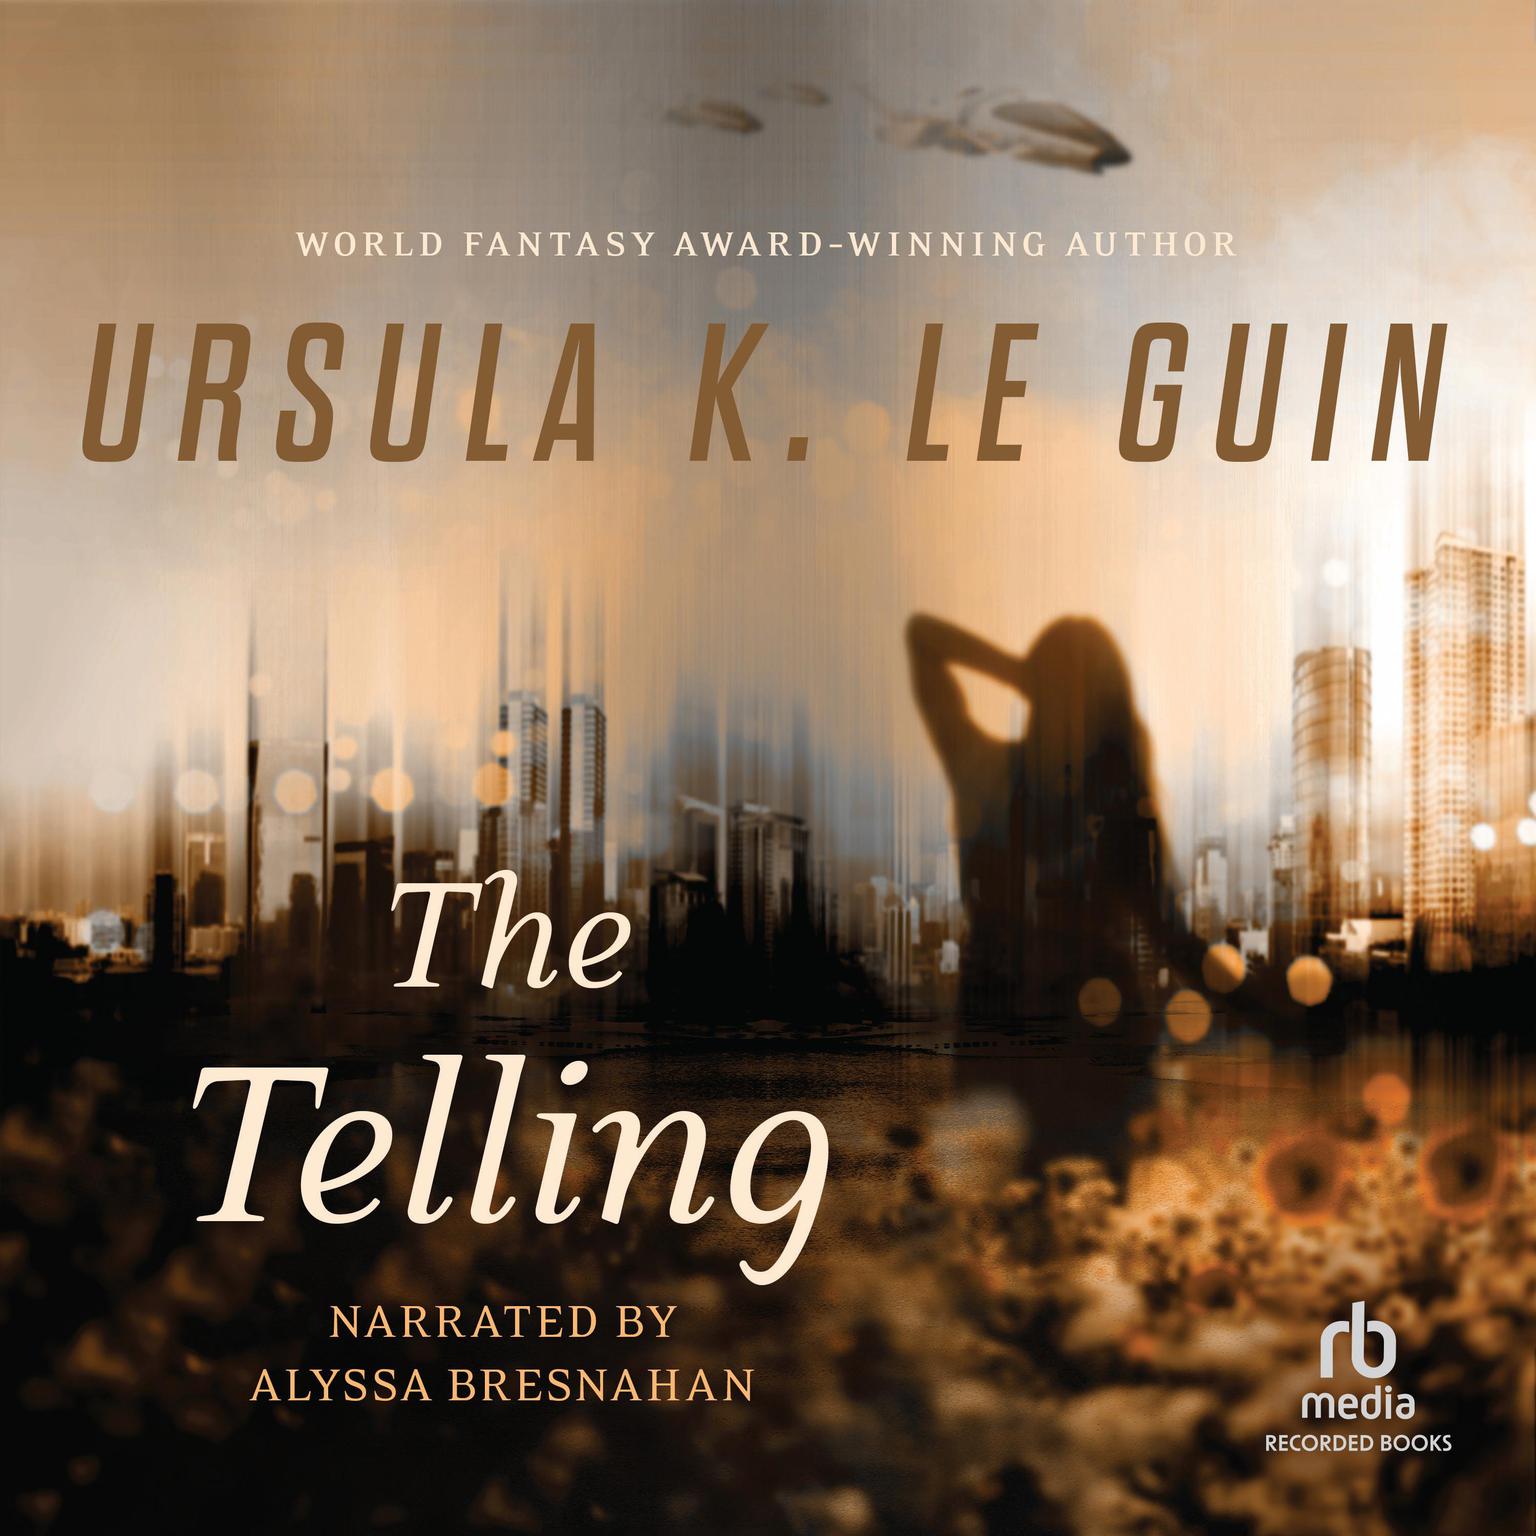 The Telling Audiobook, by Ursula K. Le Guin